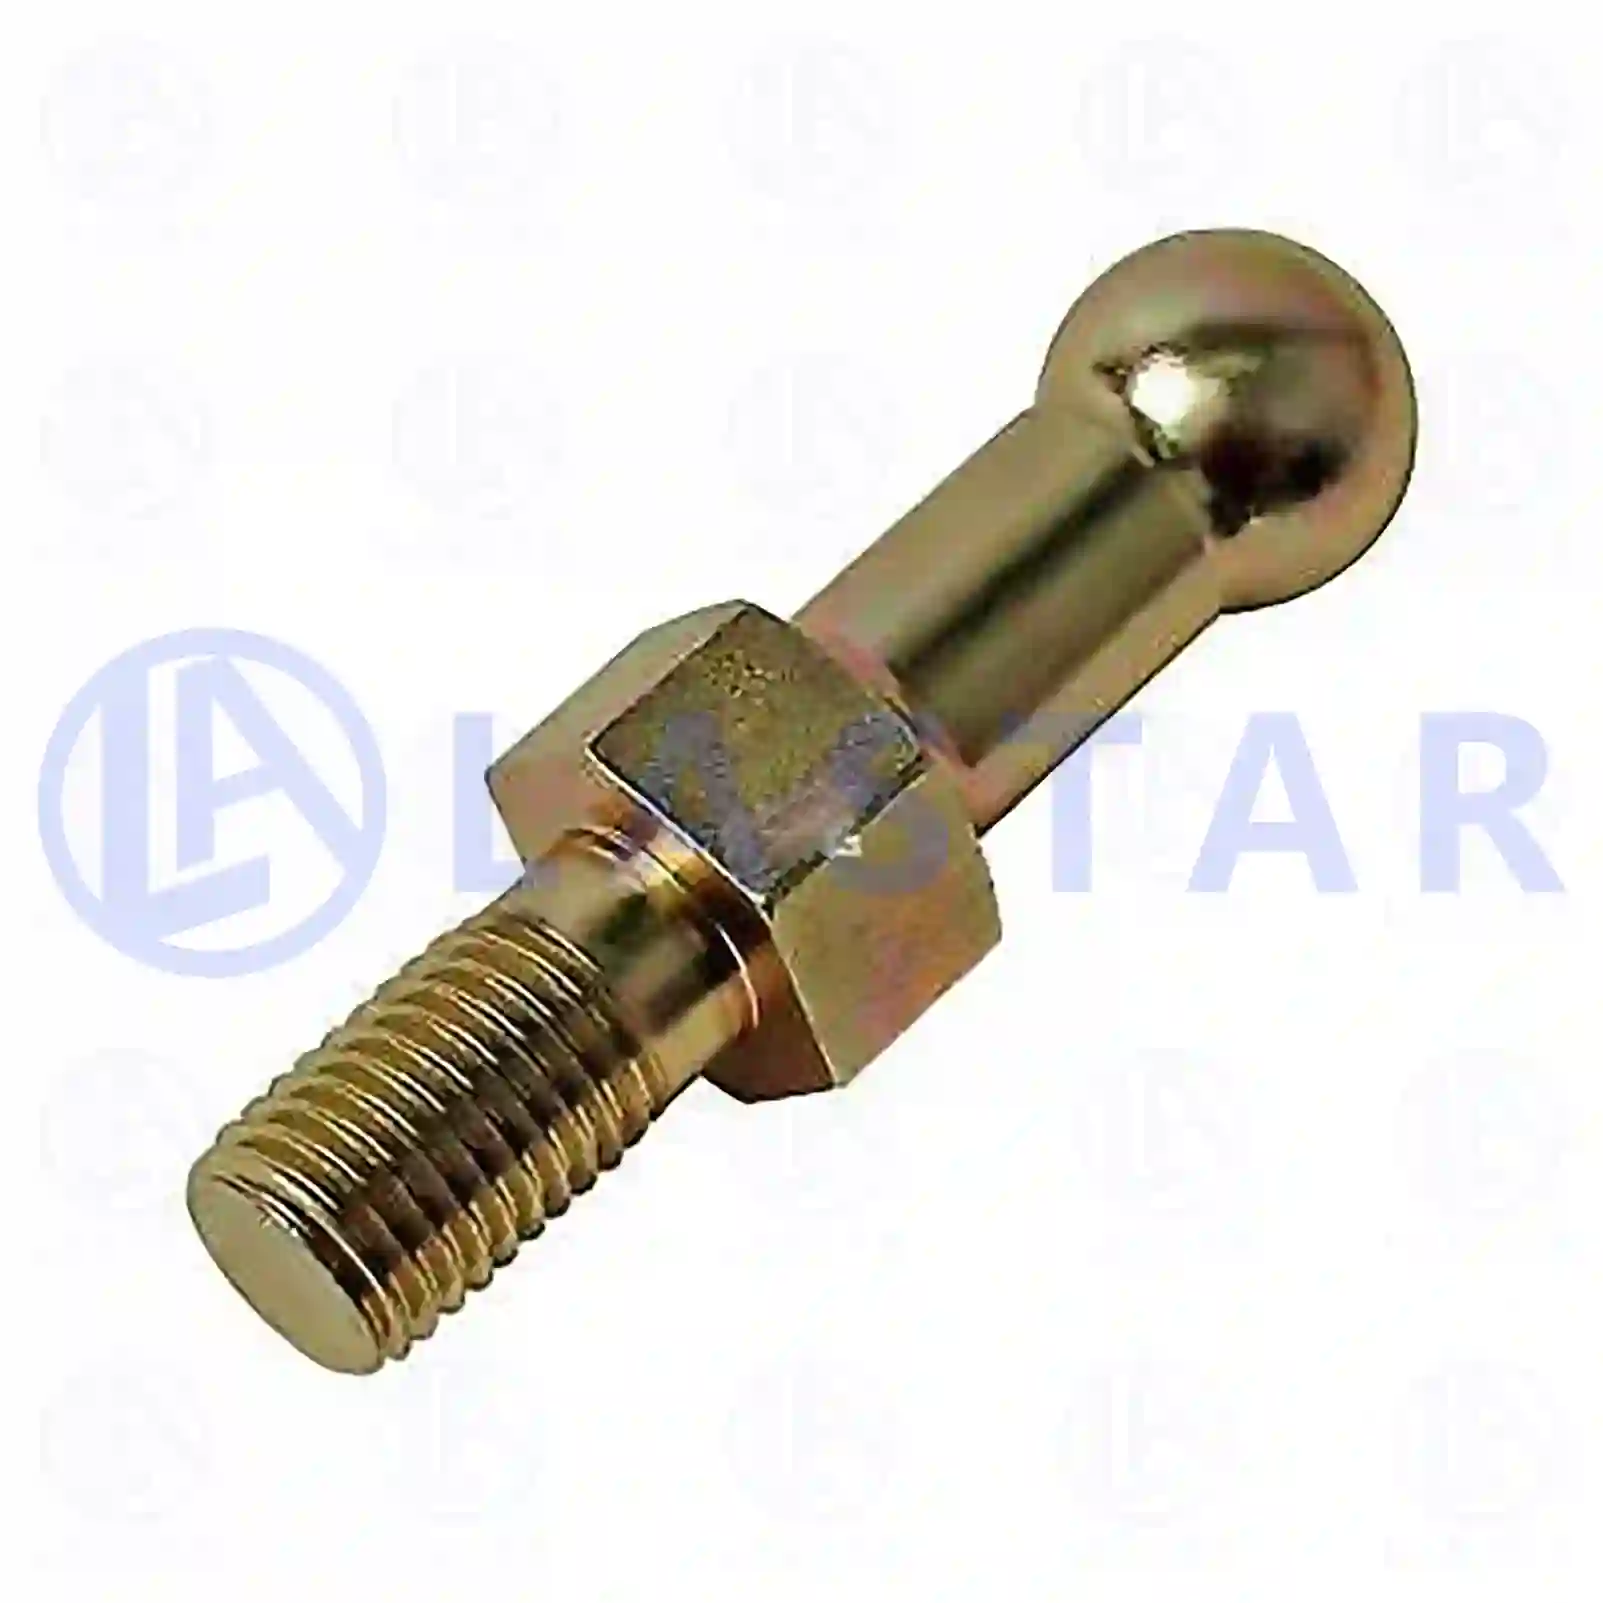  Ball screw || Lastar Spare Part | Truck Spare Parts, Auotomotive Spare Parts